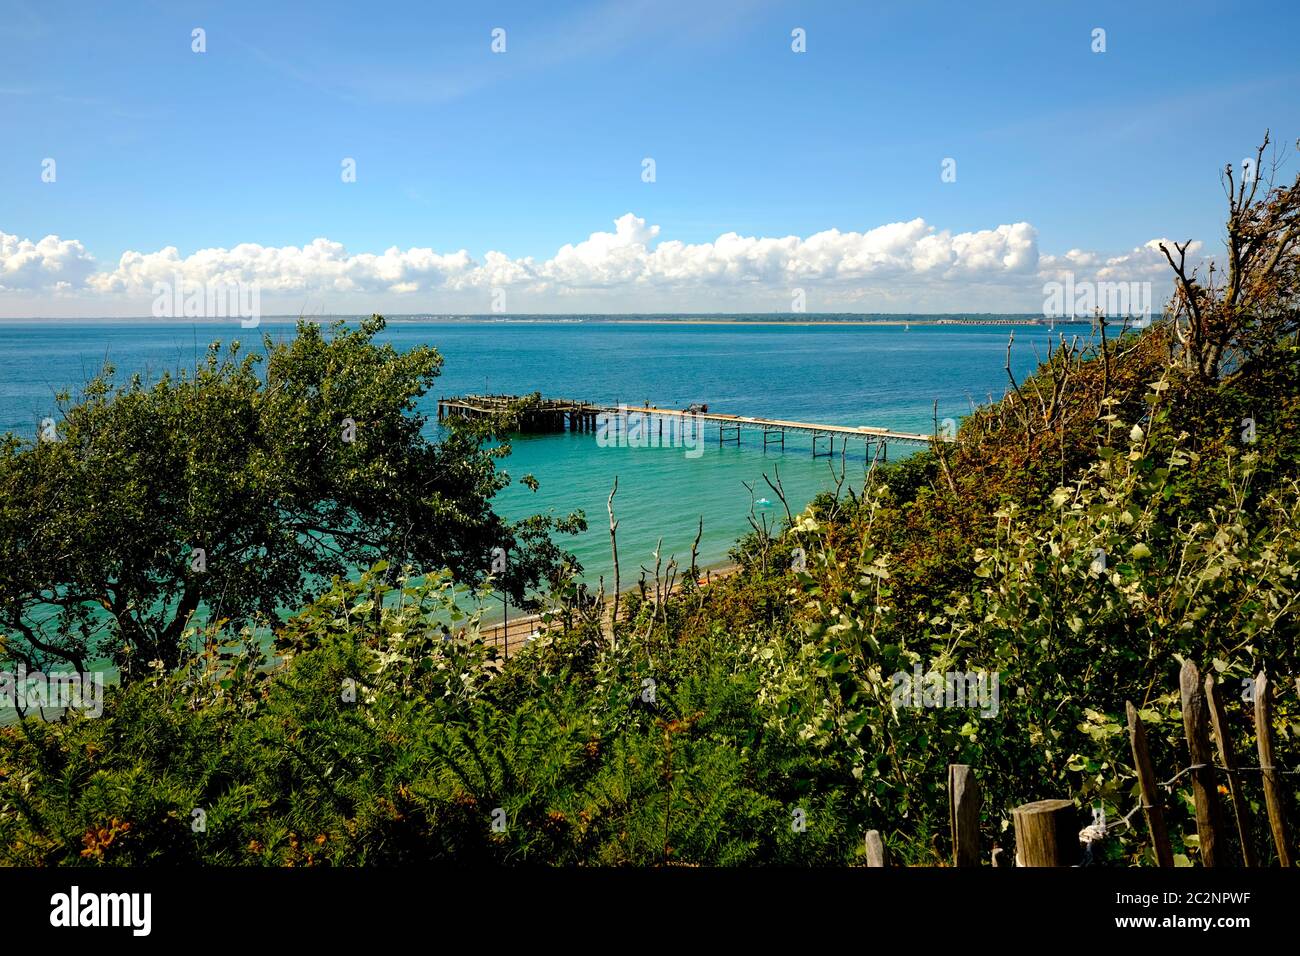 View of the Solent from the Turf Walk at Totland Bay Isle of Wight Totland Pier blue sky sea fluffy white clouds on horizon cliff top. Stock Photo